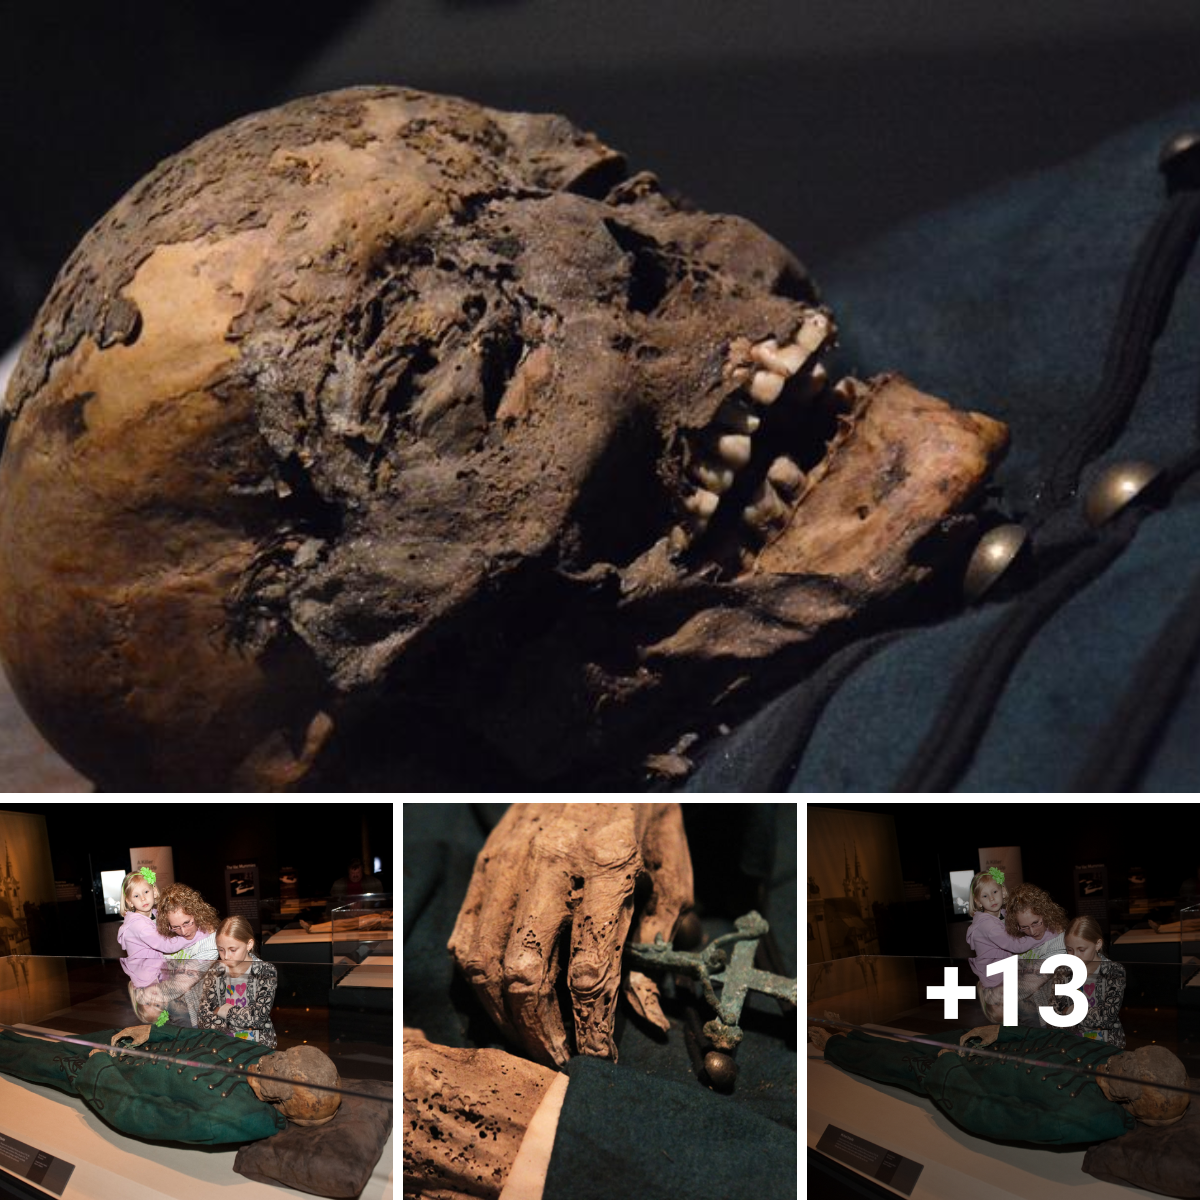 Revealing the Amazing Preservation: techniques for keeping vampire corpses preserved